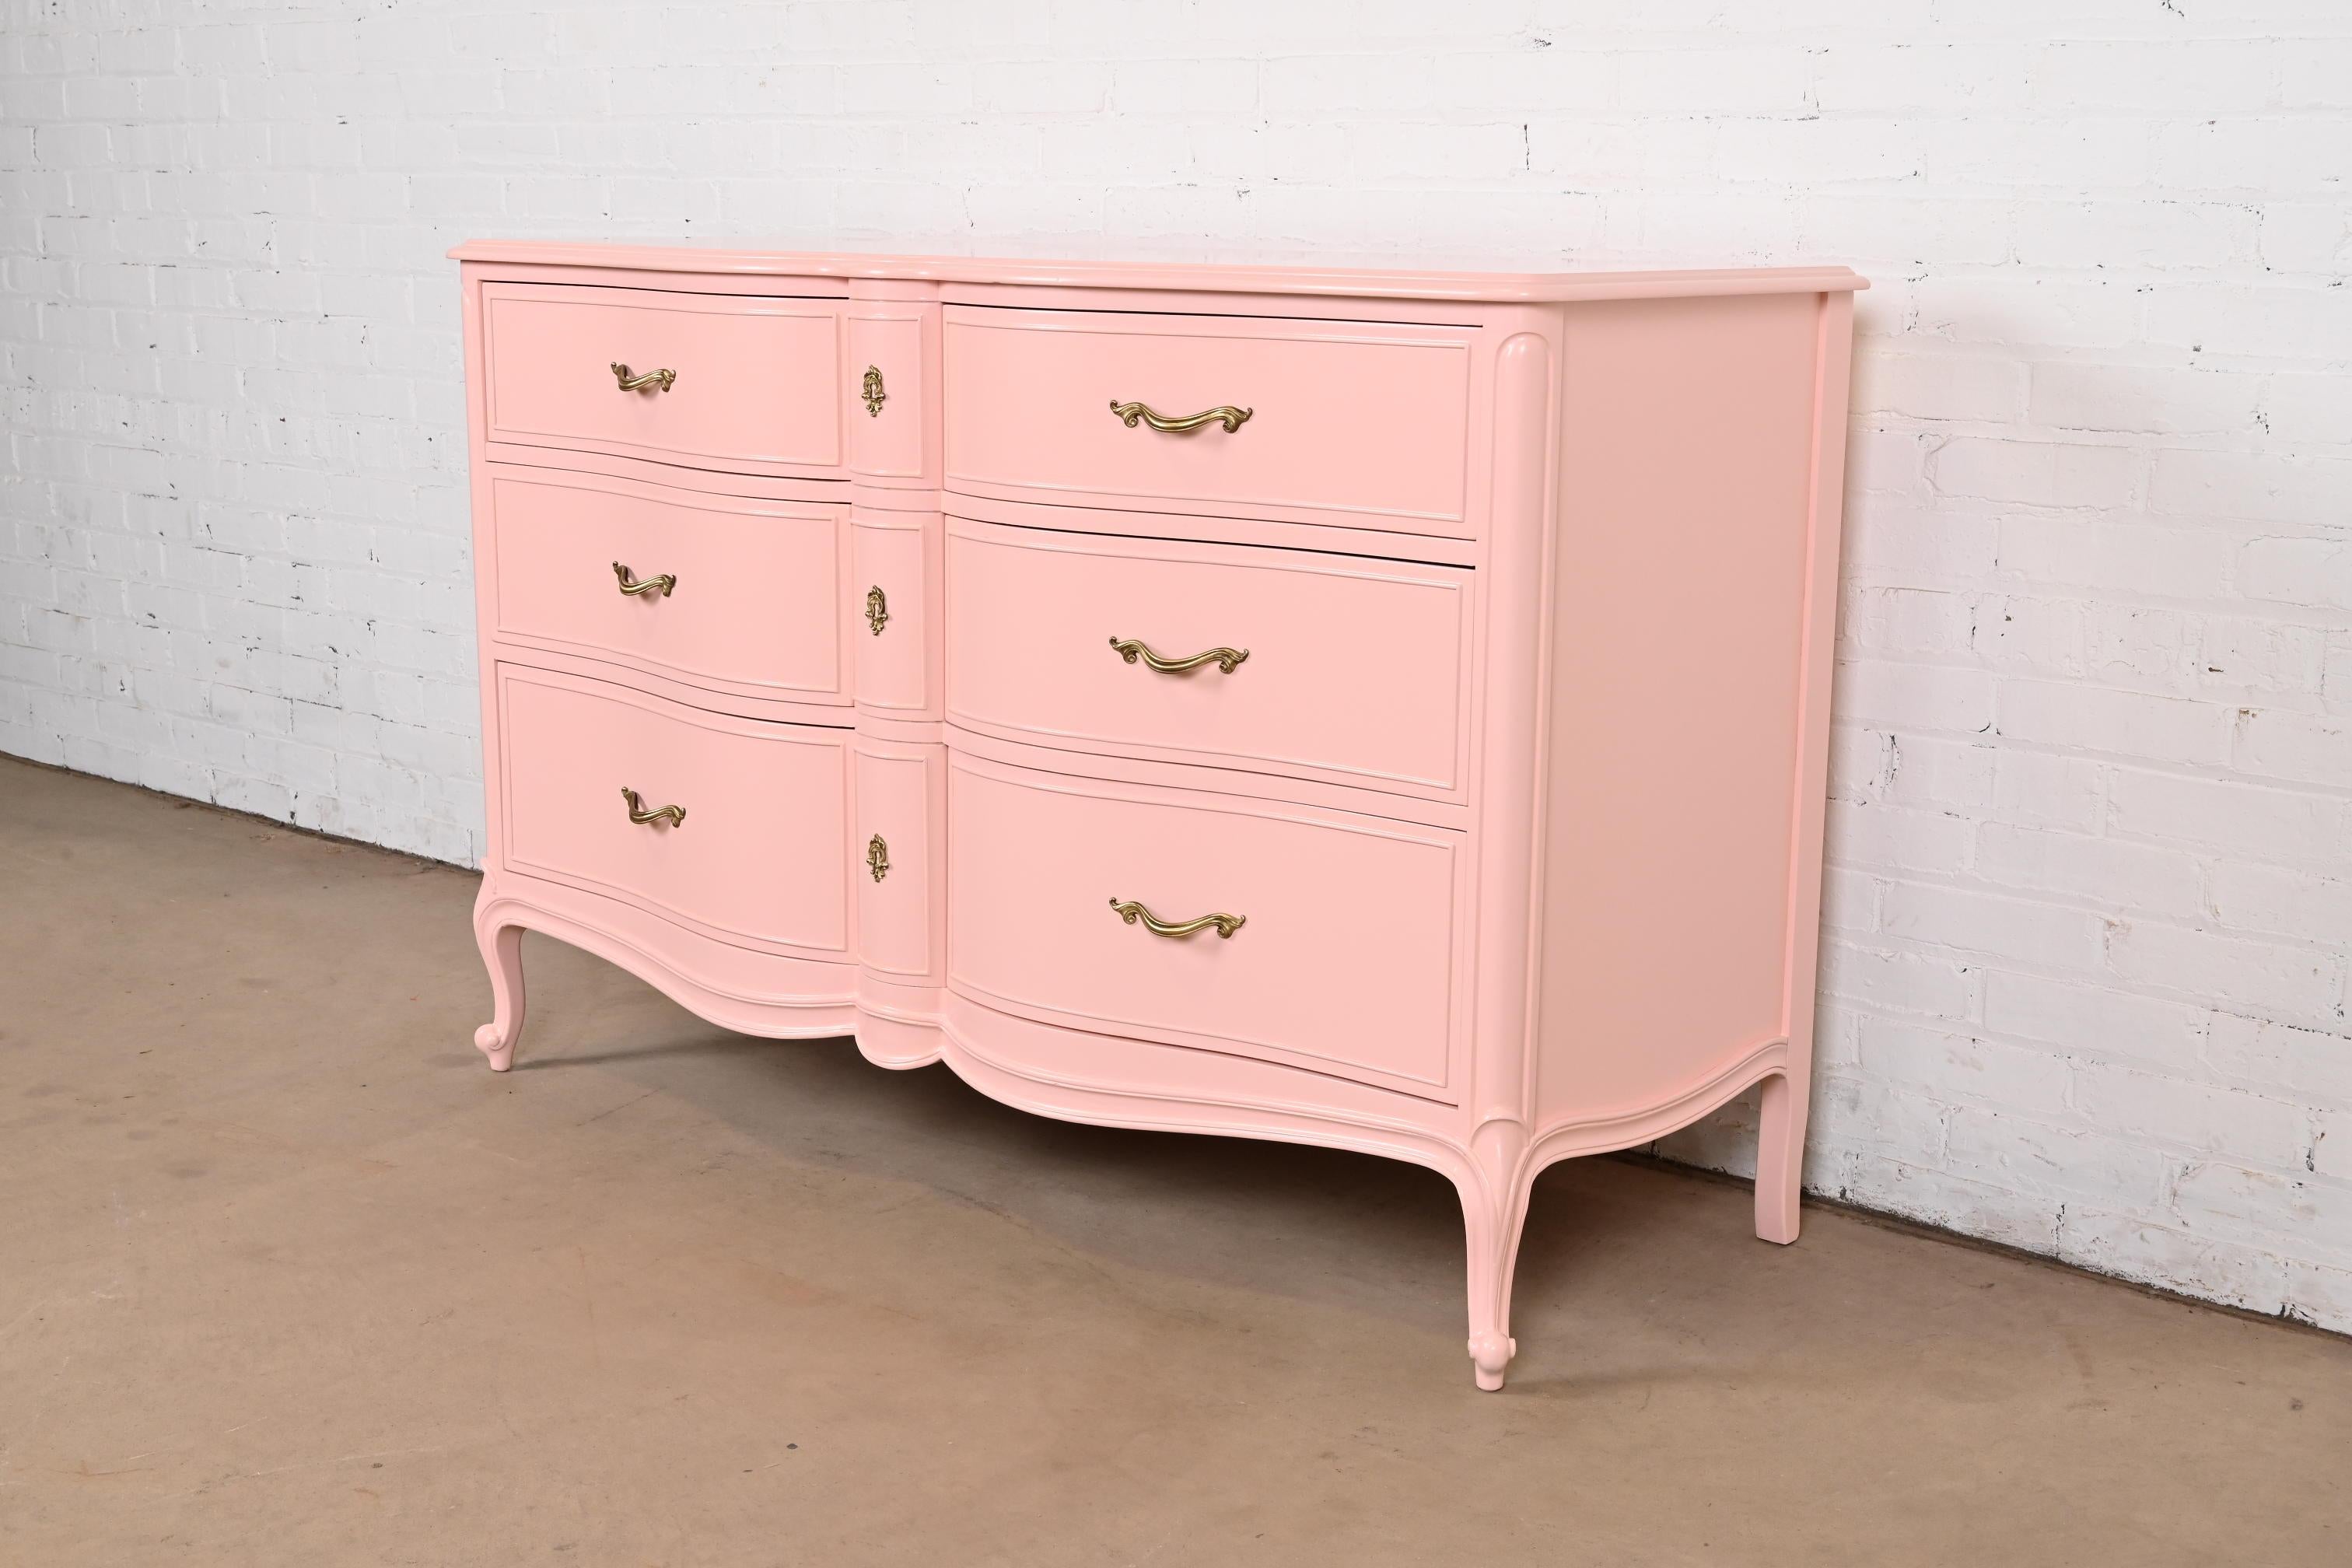 Drexel French Provincial Louis XV Rosa lackierte Kommode, neu lackiert im Zustand „Gut“ im Angebot in South Bend, IN